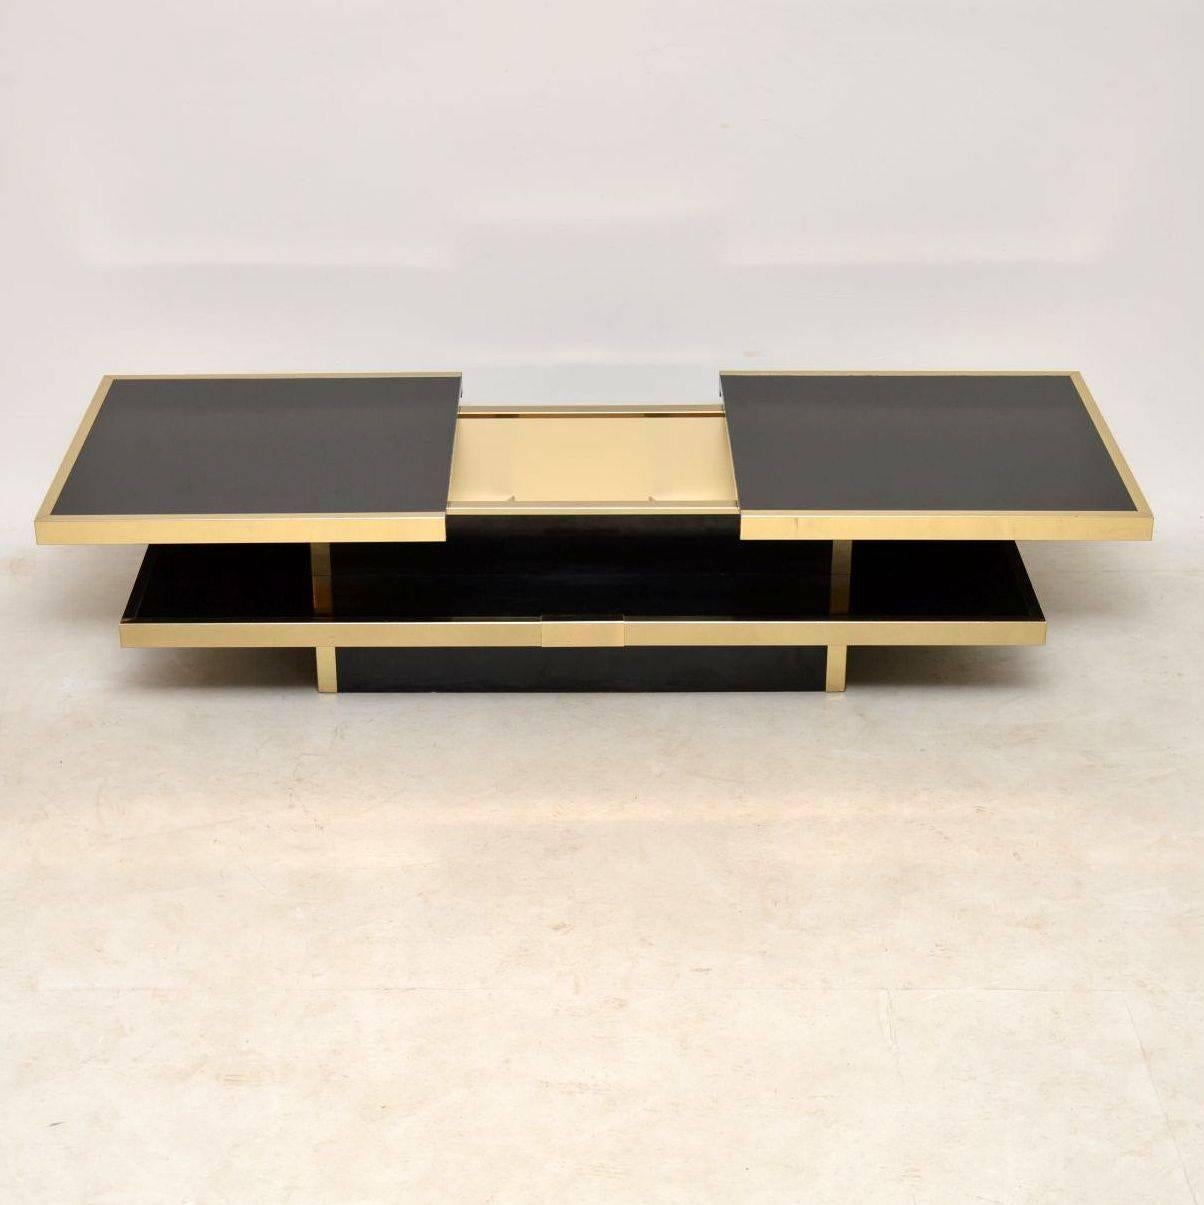 A magnificent vintage coffee table, this was made in Italy and dates from the 1970s. It’s very well made in black formica with a brass trim, and in great condition for its age. There is just some extremely minor surface wear here and there, the